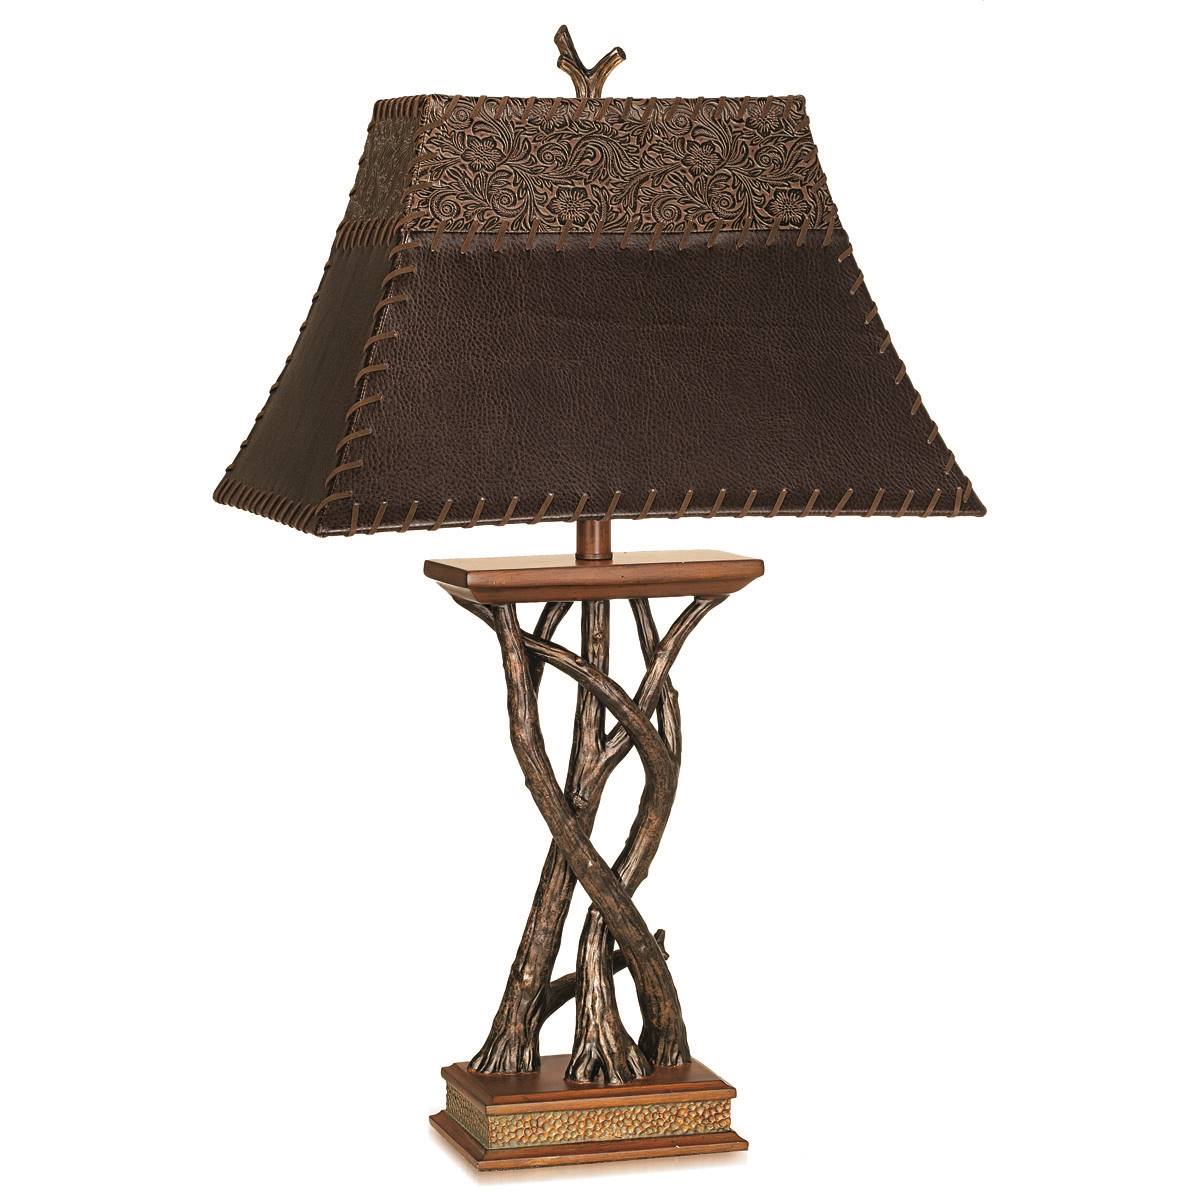 Pacific Coast Lighting Montana Reflection 31in. Table Lamp